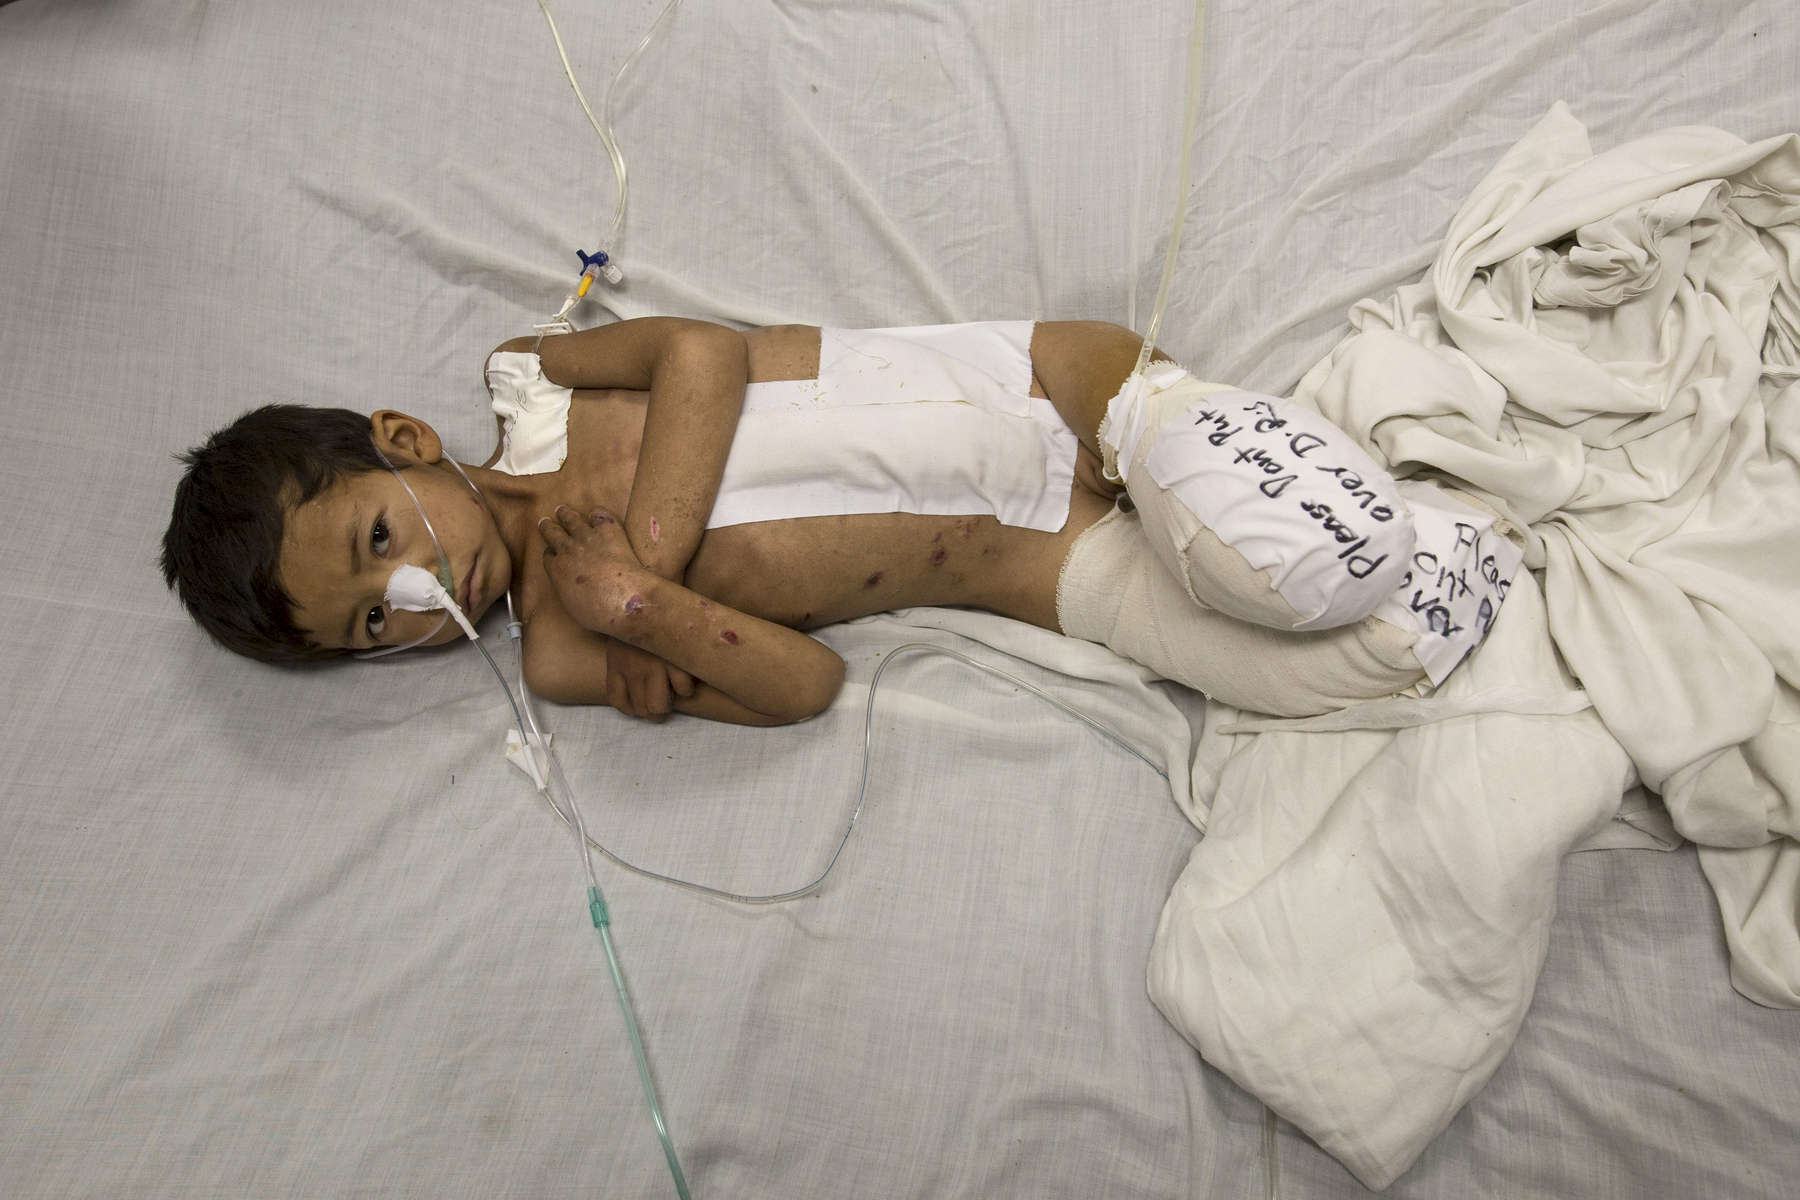 KABUL, AFGHANISTAN -APRIL 3, 2016: Kabir age 5, from Faryab lays in bed at the Emergency hospital in Kabul on April 3, 2016. He is a victim of a rocket attack, lost both of his legs along with his sister and brother who were also killed. Afghan civilians are at greater risk today than at any time since Taliban rule. According to UN statistics, in the first half of 2016 at least 1,600 people had died, and more than 3,500 people were injured, a 4 per cent increase in overall civilian causalities compared to the same period last year. The upsurge in violence has had devastating consequences for civilians, with suicide bombings and targeted attacks by the Taliban and other insurgents causing 70 percent of all civilian casualties.  